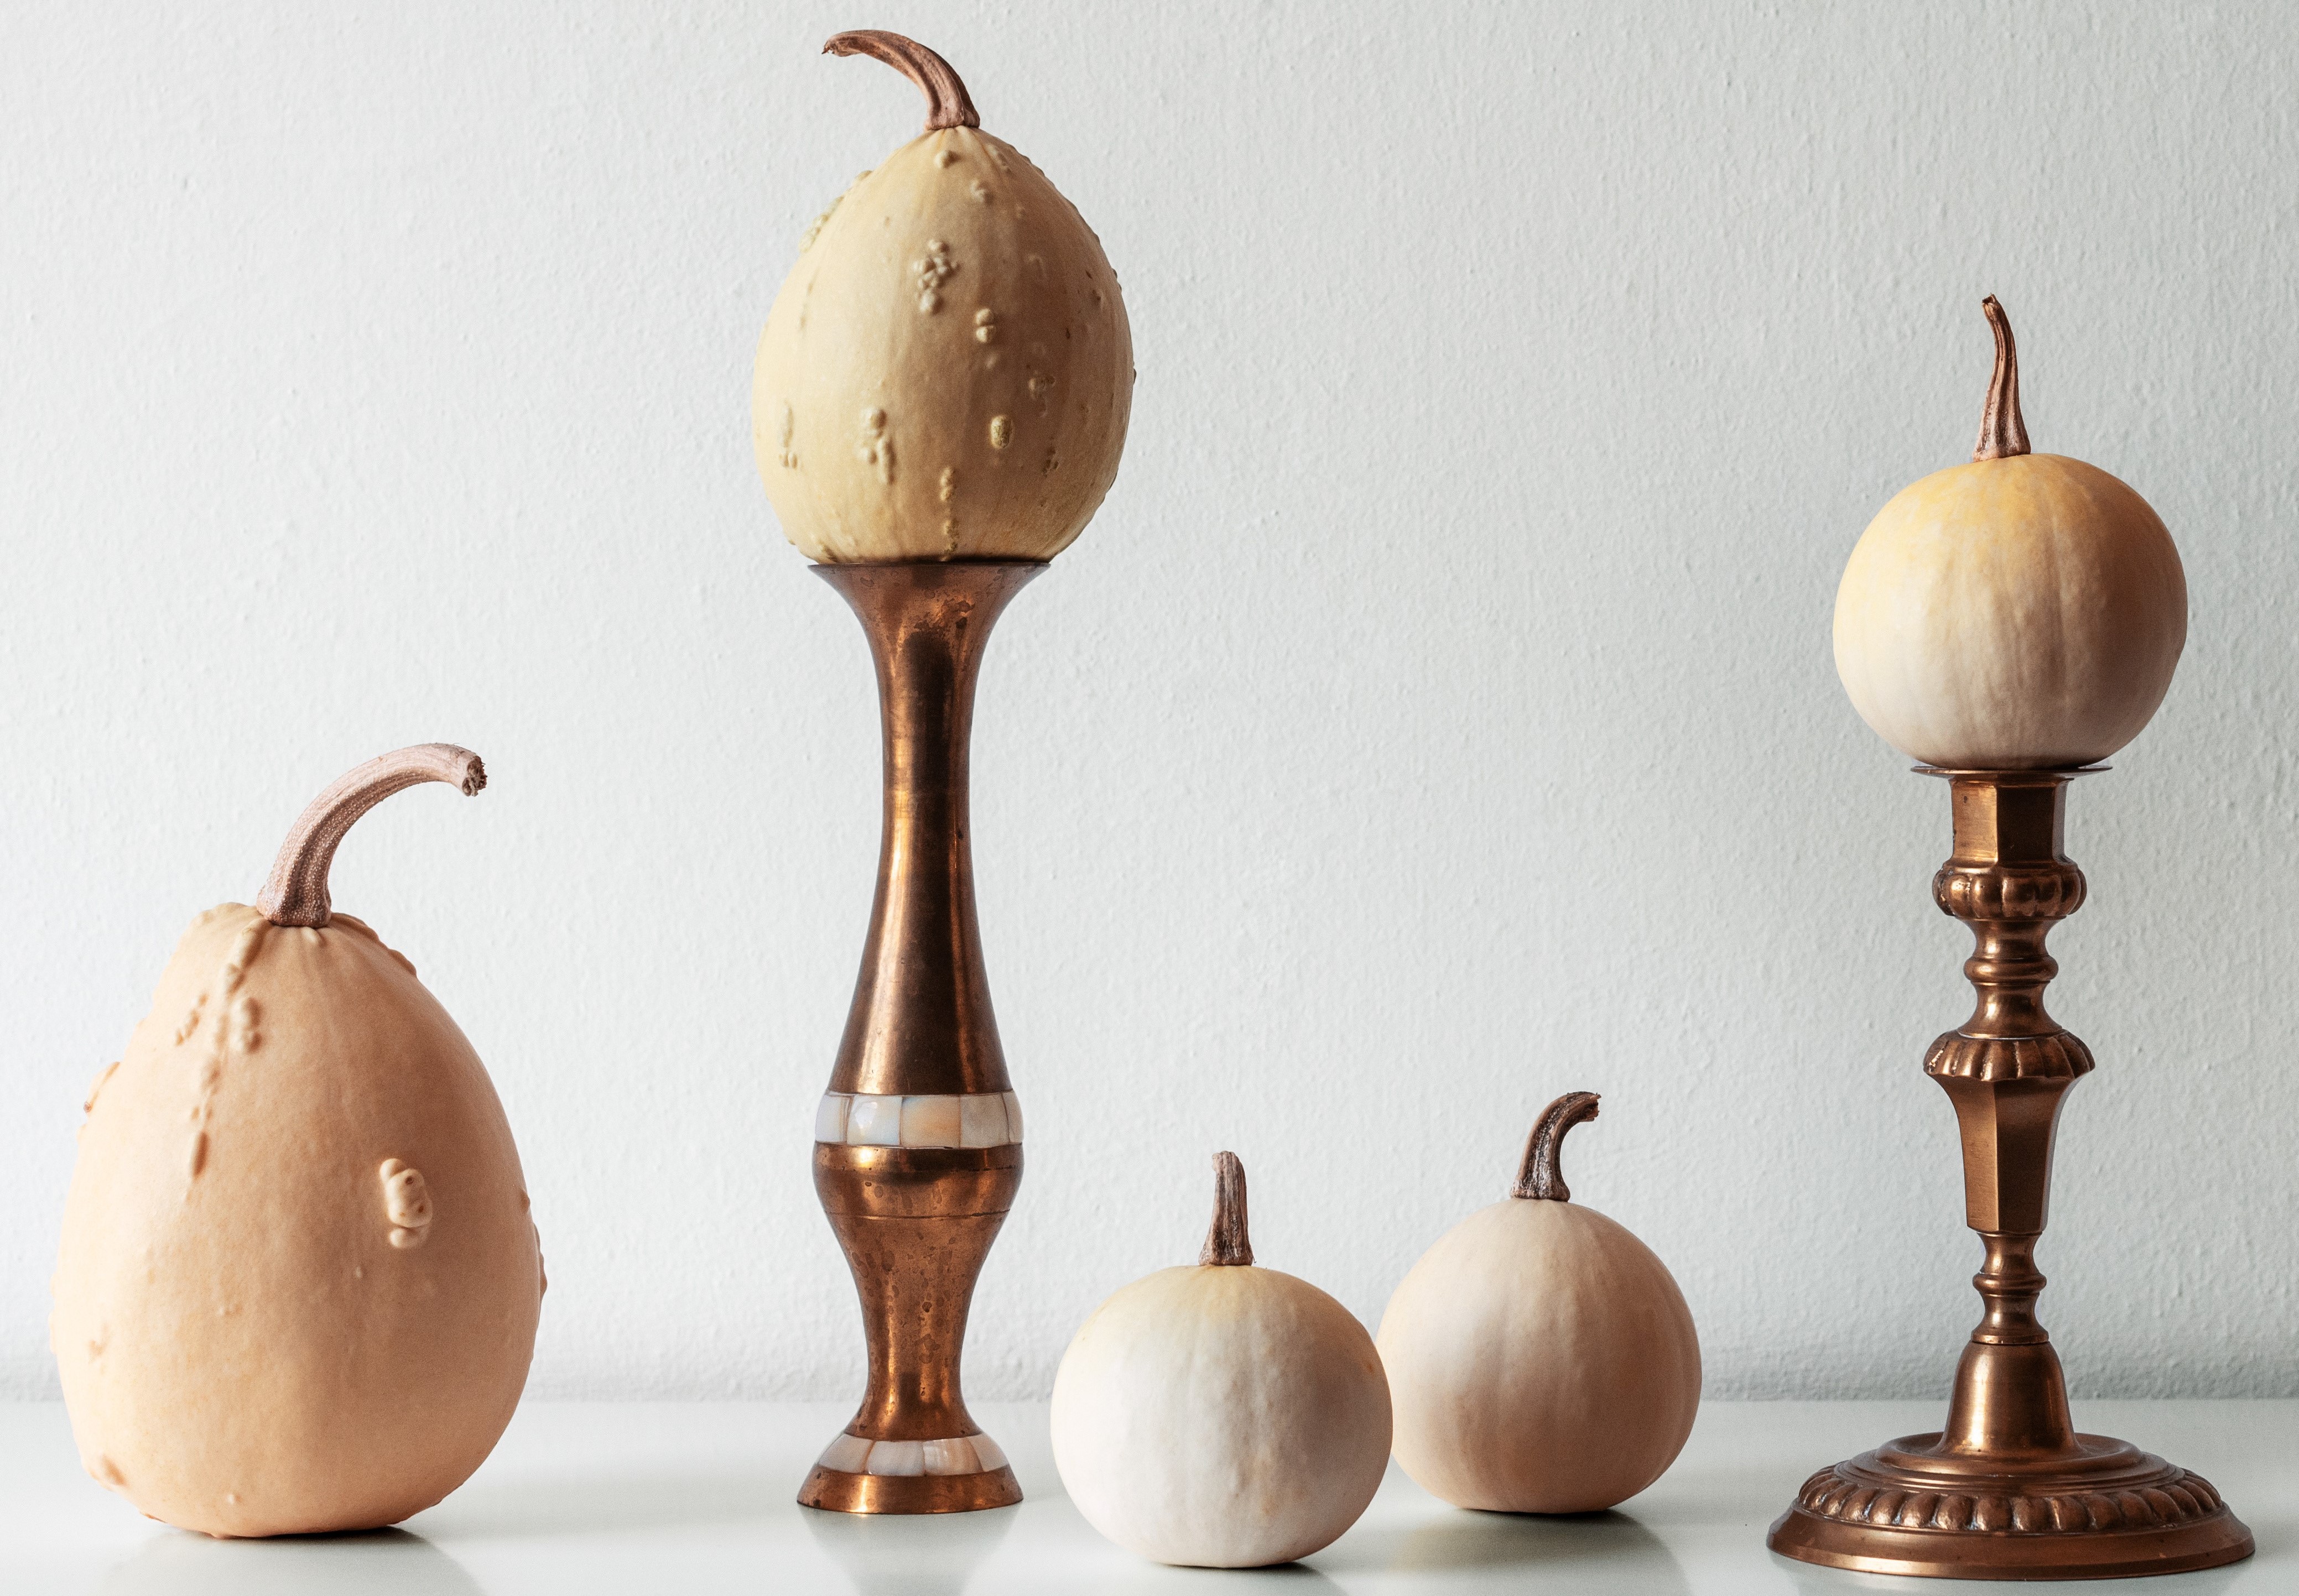 Thanksgiving decoration. Minimal autumn inspired room decoration. Selection of various pumpkins on white shelf against white wall.